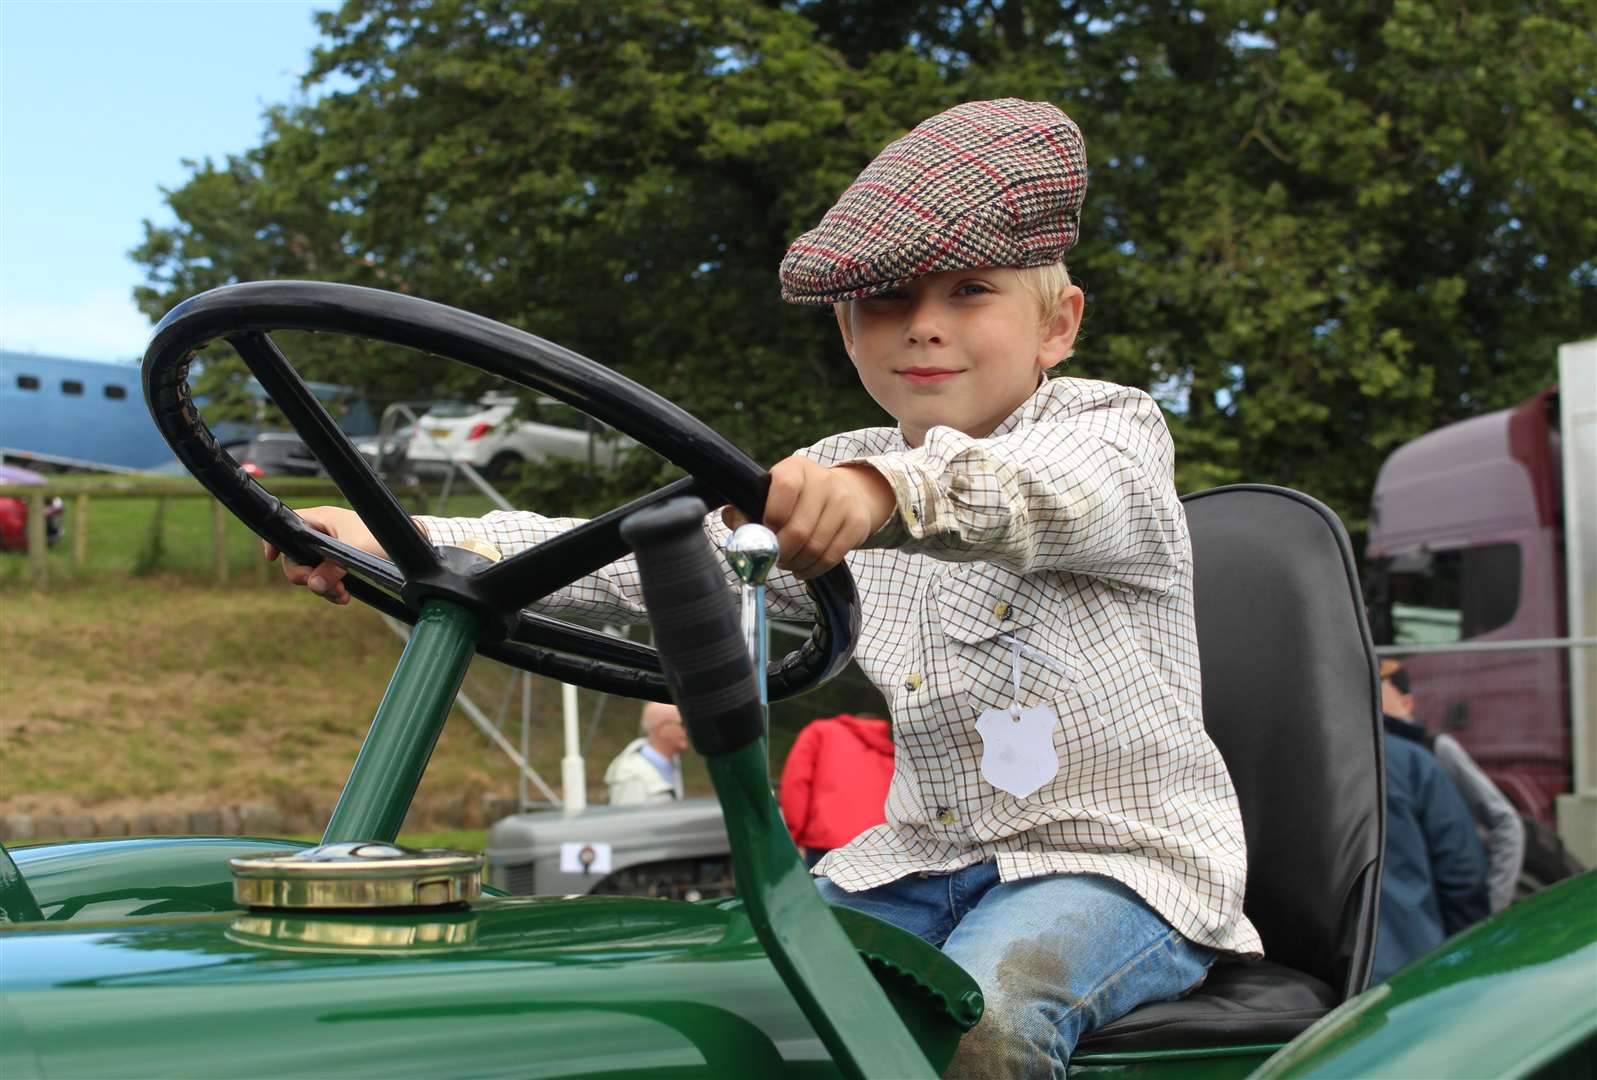 Young Camden Hollick, from Thurso, was among the thousands who visited the County Show in Wick last year. Here he is at the wheel of a 1948 Field Marshall tractor owned by Nicol Mackenzie. Picture: Alan Hendry